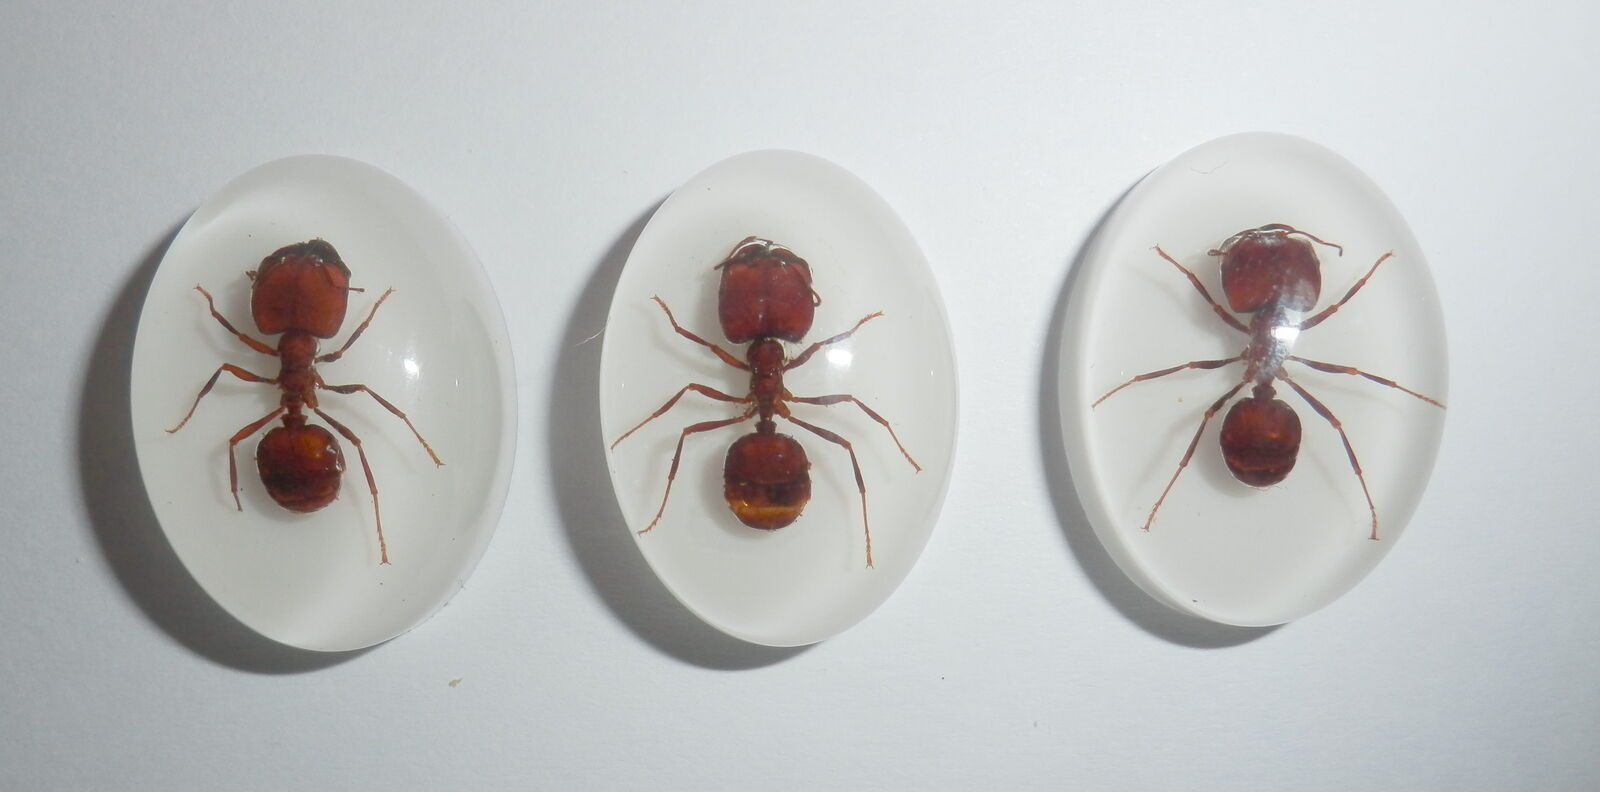 Insect Cabochon Big-head Ant Oval 18x25 mm on White Bottom 3 pcs Lot